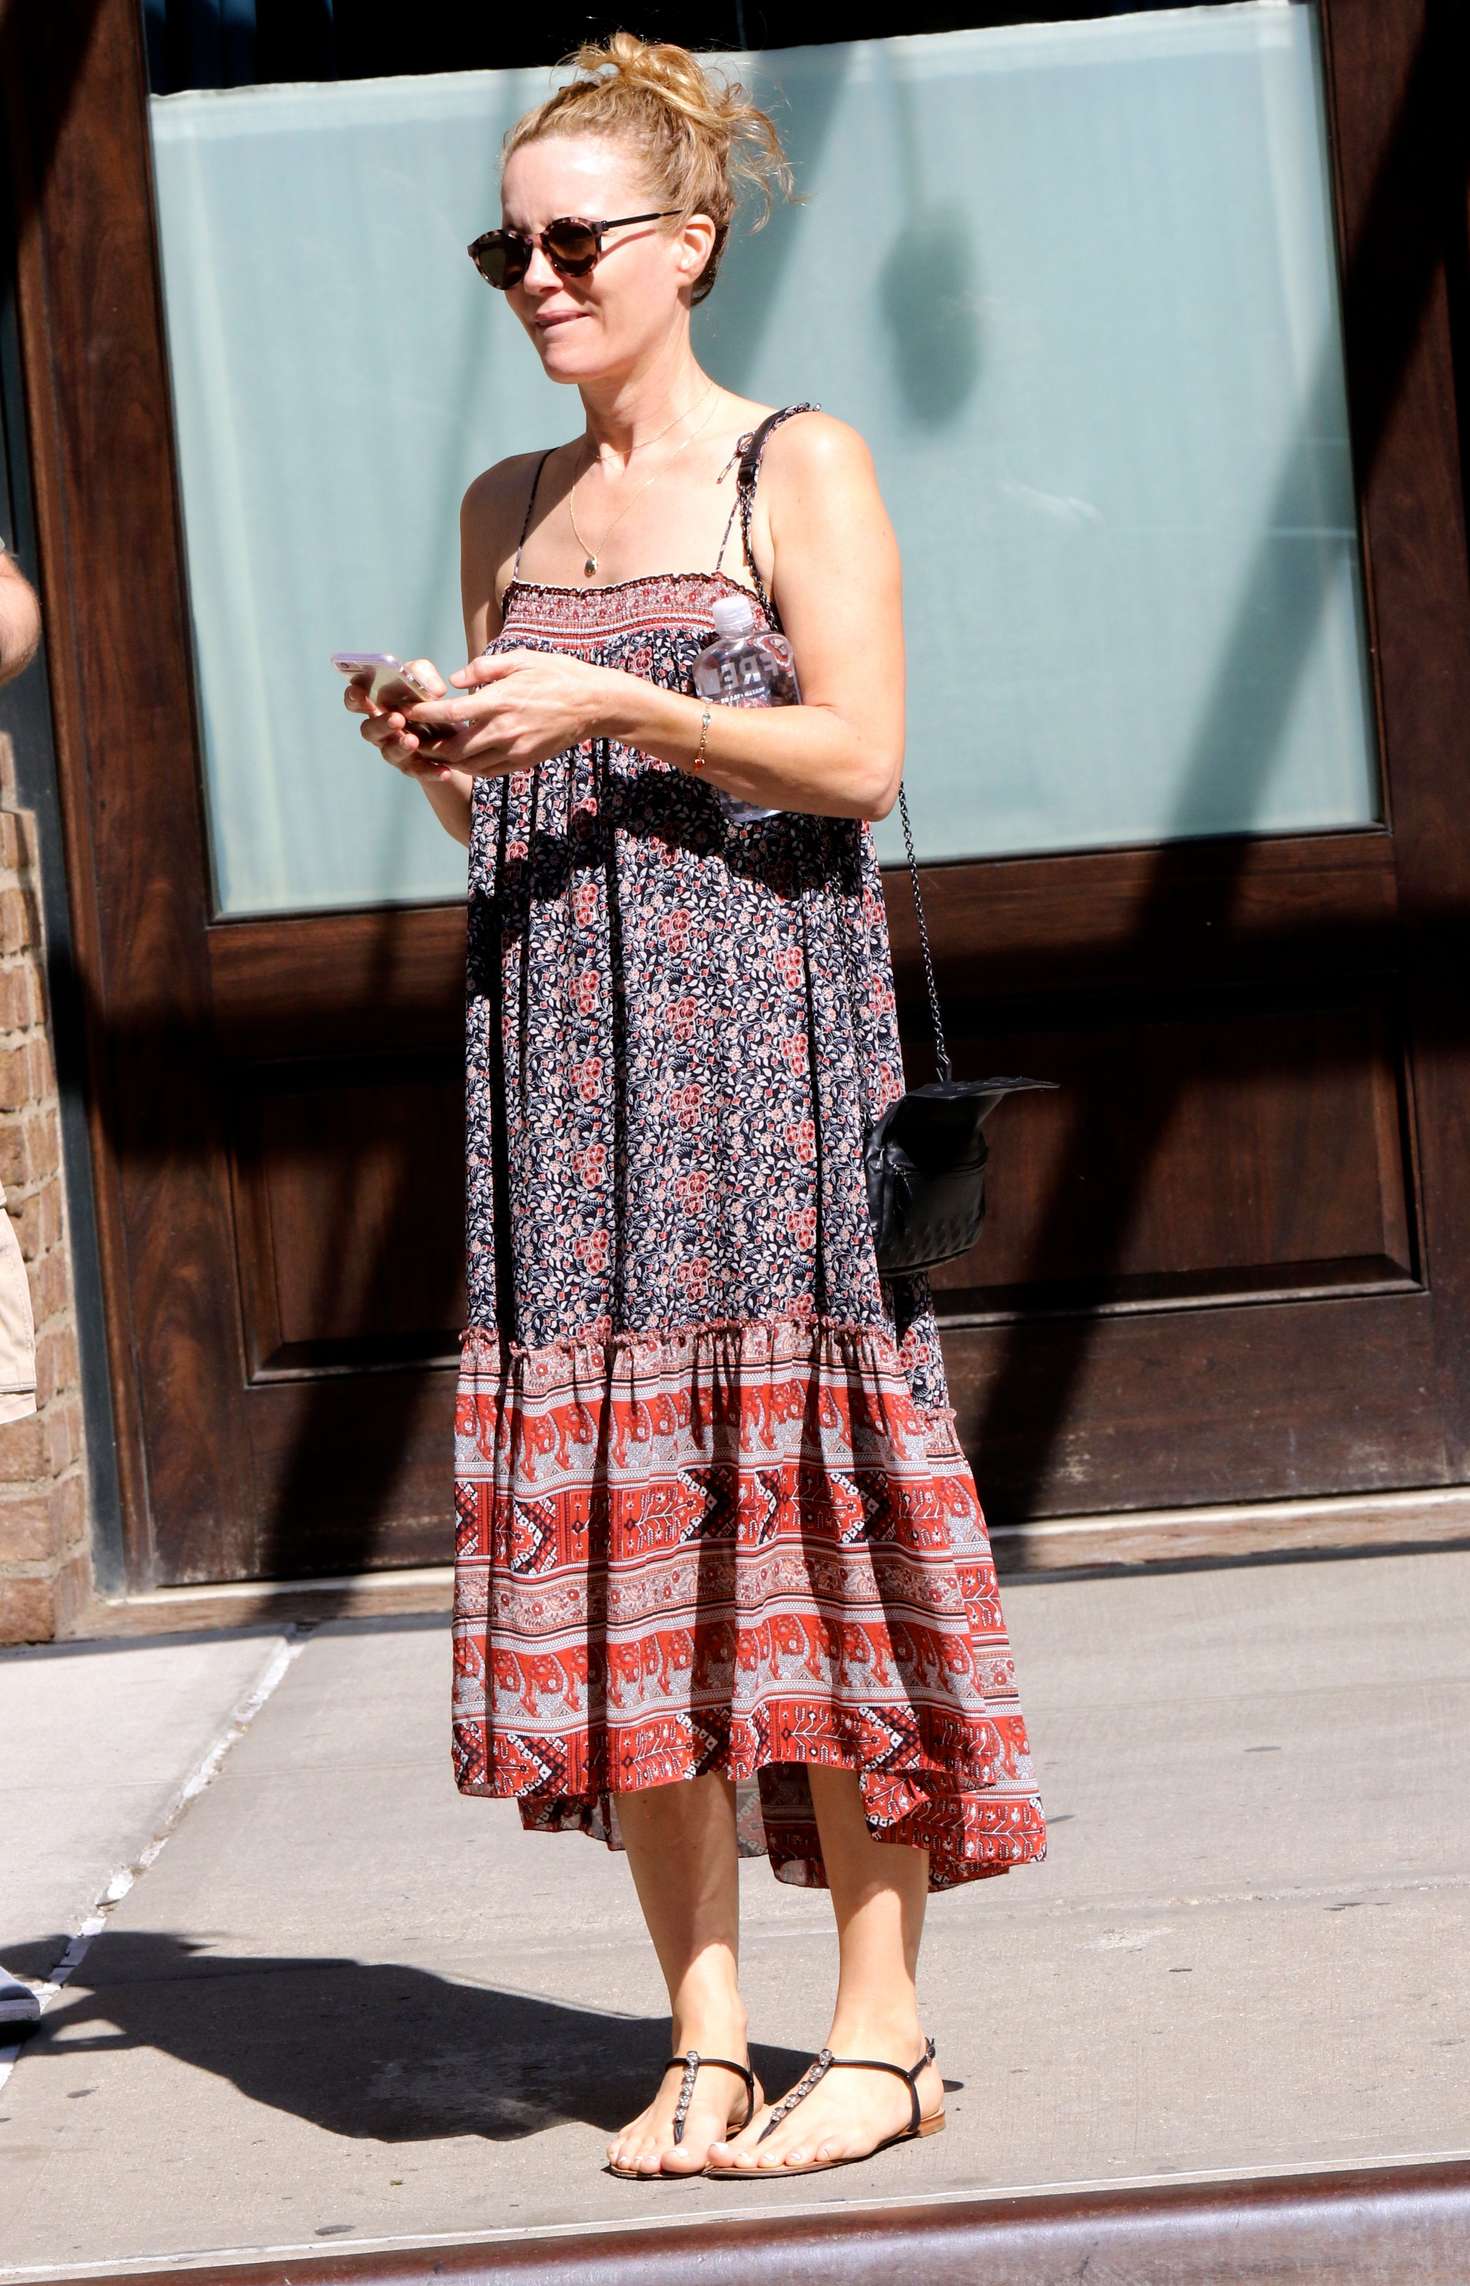 Leslie Mann in Long Dress out in NYC